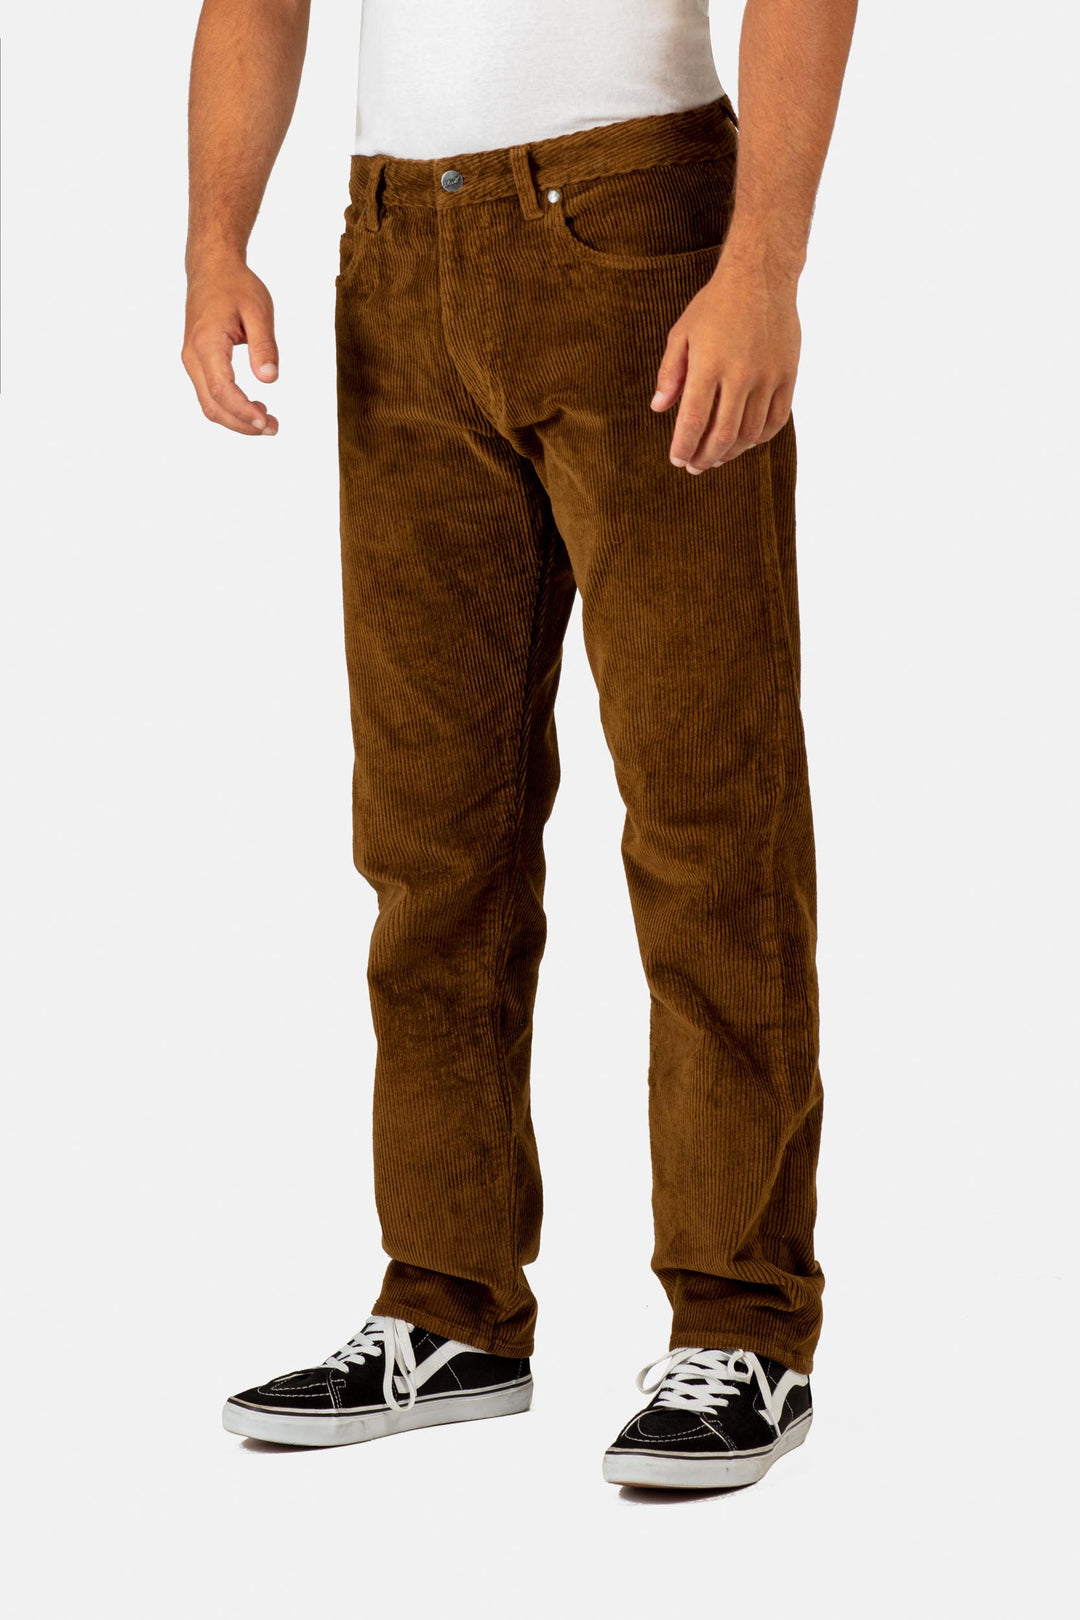 Reell Jeans Barfly Brown Cord